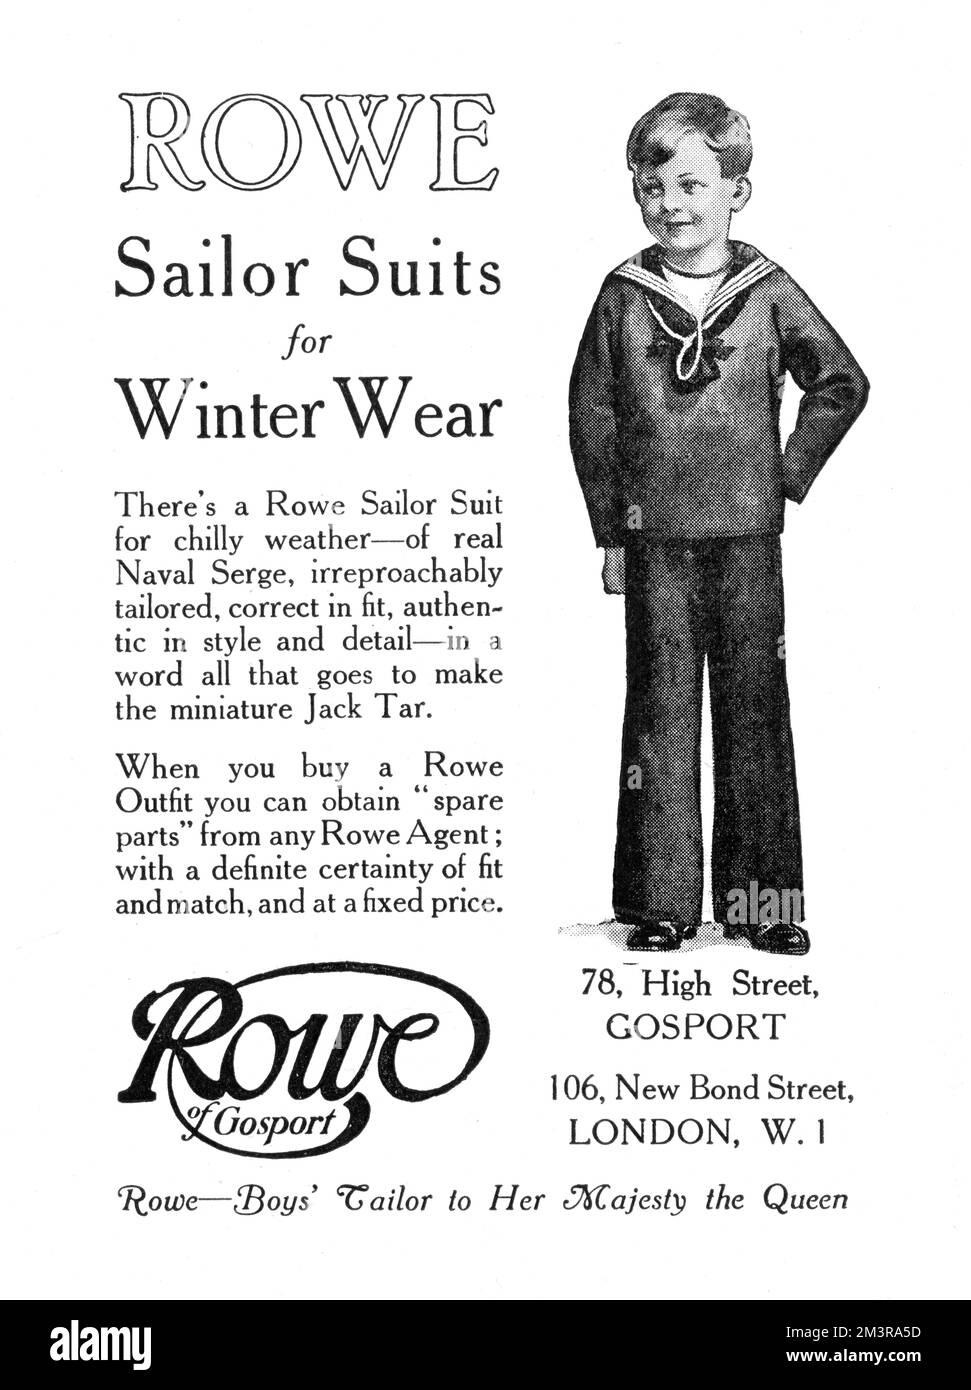 Advertisement for a boy's sailor suit for winter weather in real naval serge, 'irreproachably tailored, correct in fit, authentic in style and detail - in a word all that goes to make the miniature Jack Tar.'  Available from Rowe, Boys' Tailor to Her Majesty the Queen.       Date: 1919 Stock Photo